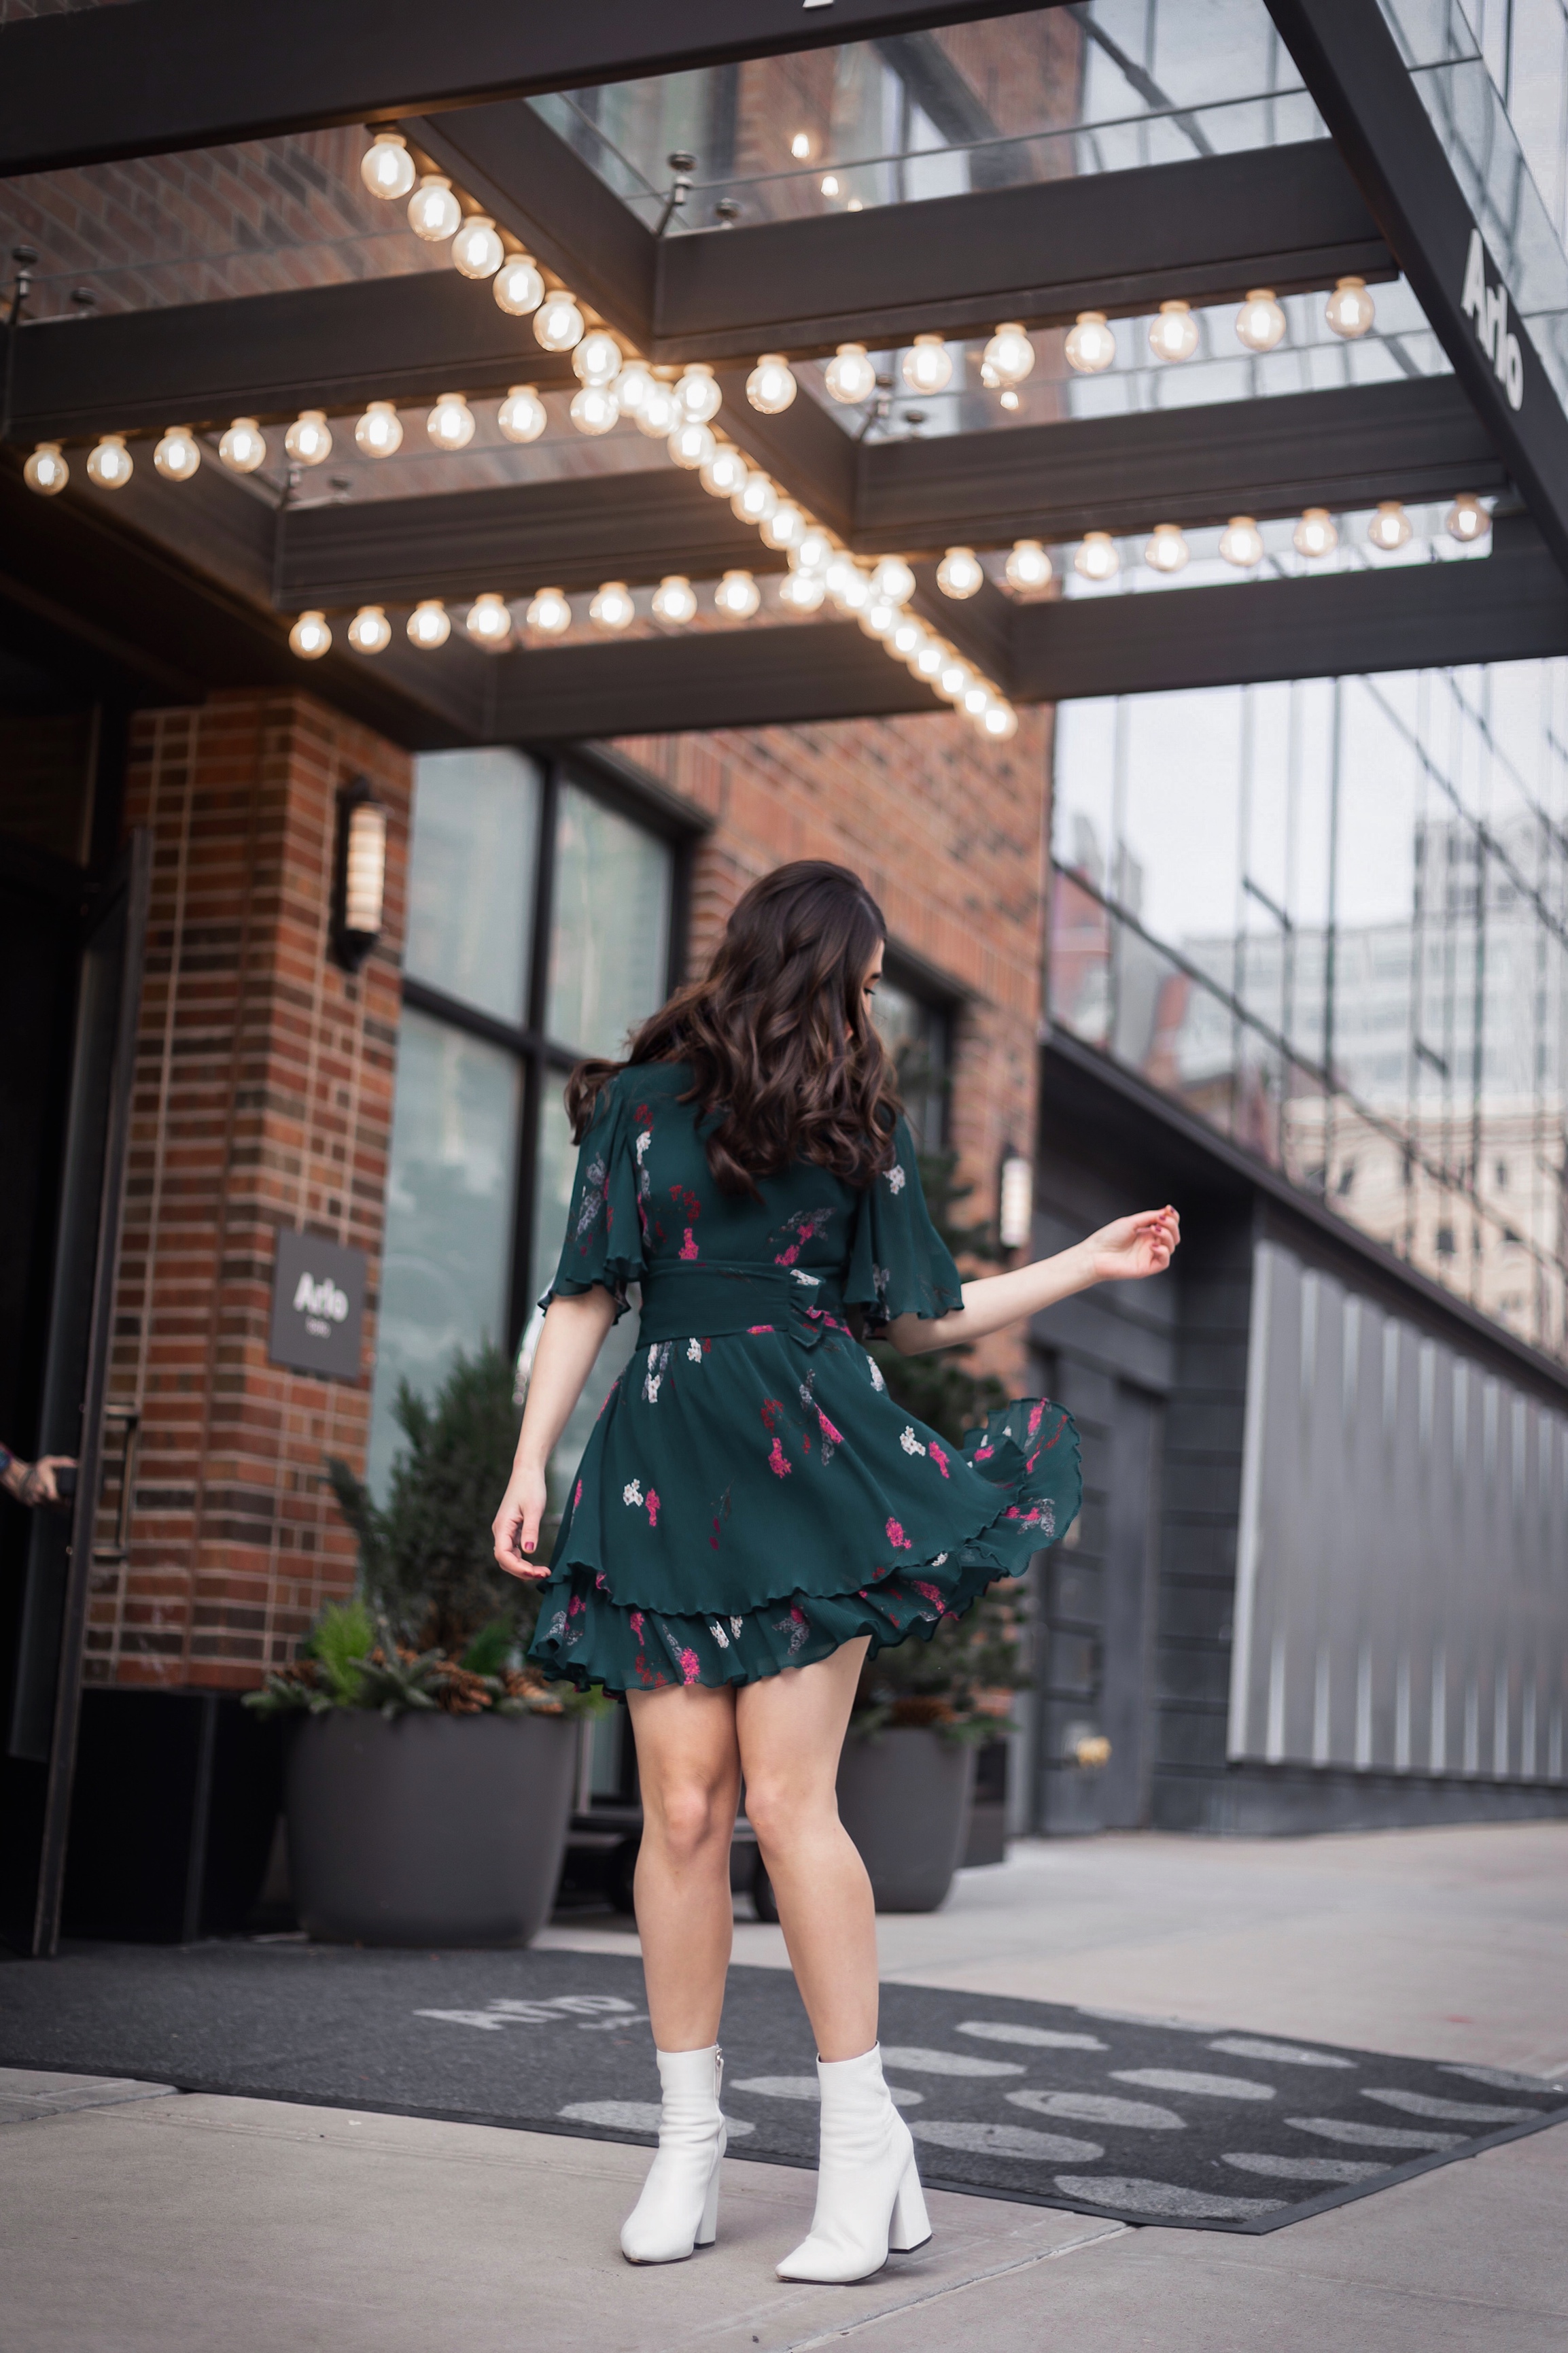 10 NYC Experiences Everyone Should Have Green Floral Dress White Booties Esther Santer Fashion Blog NYC Street Style Blogger Outfit OOTD Trendy Shopping Girl What How To Wear Bobby Pins Hairstyle Fall Look Butterfly Sleeves Keepsake Label Arlo Soho.JPG